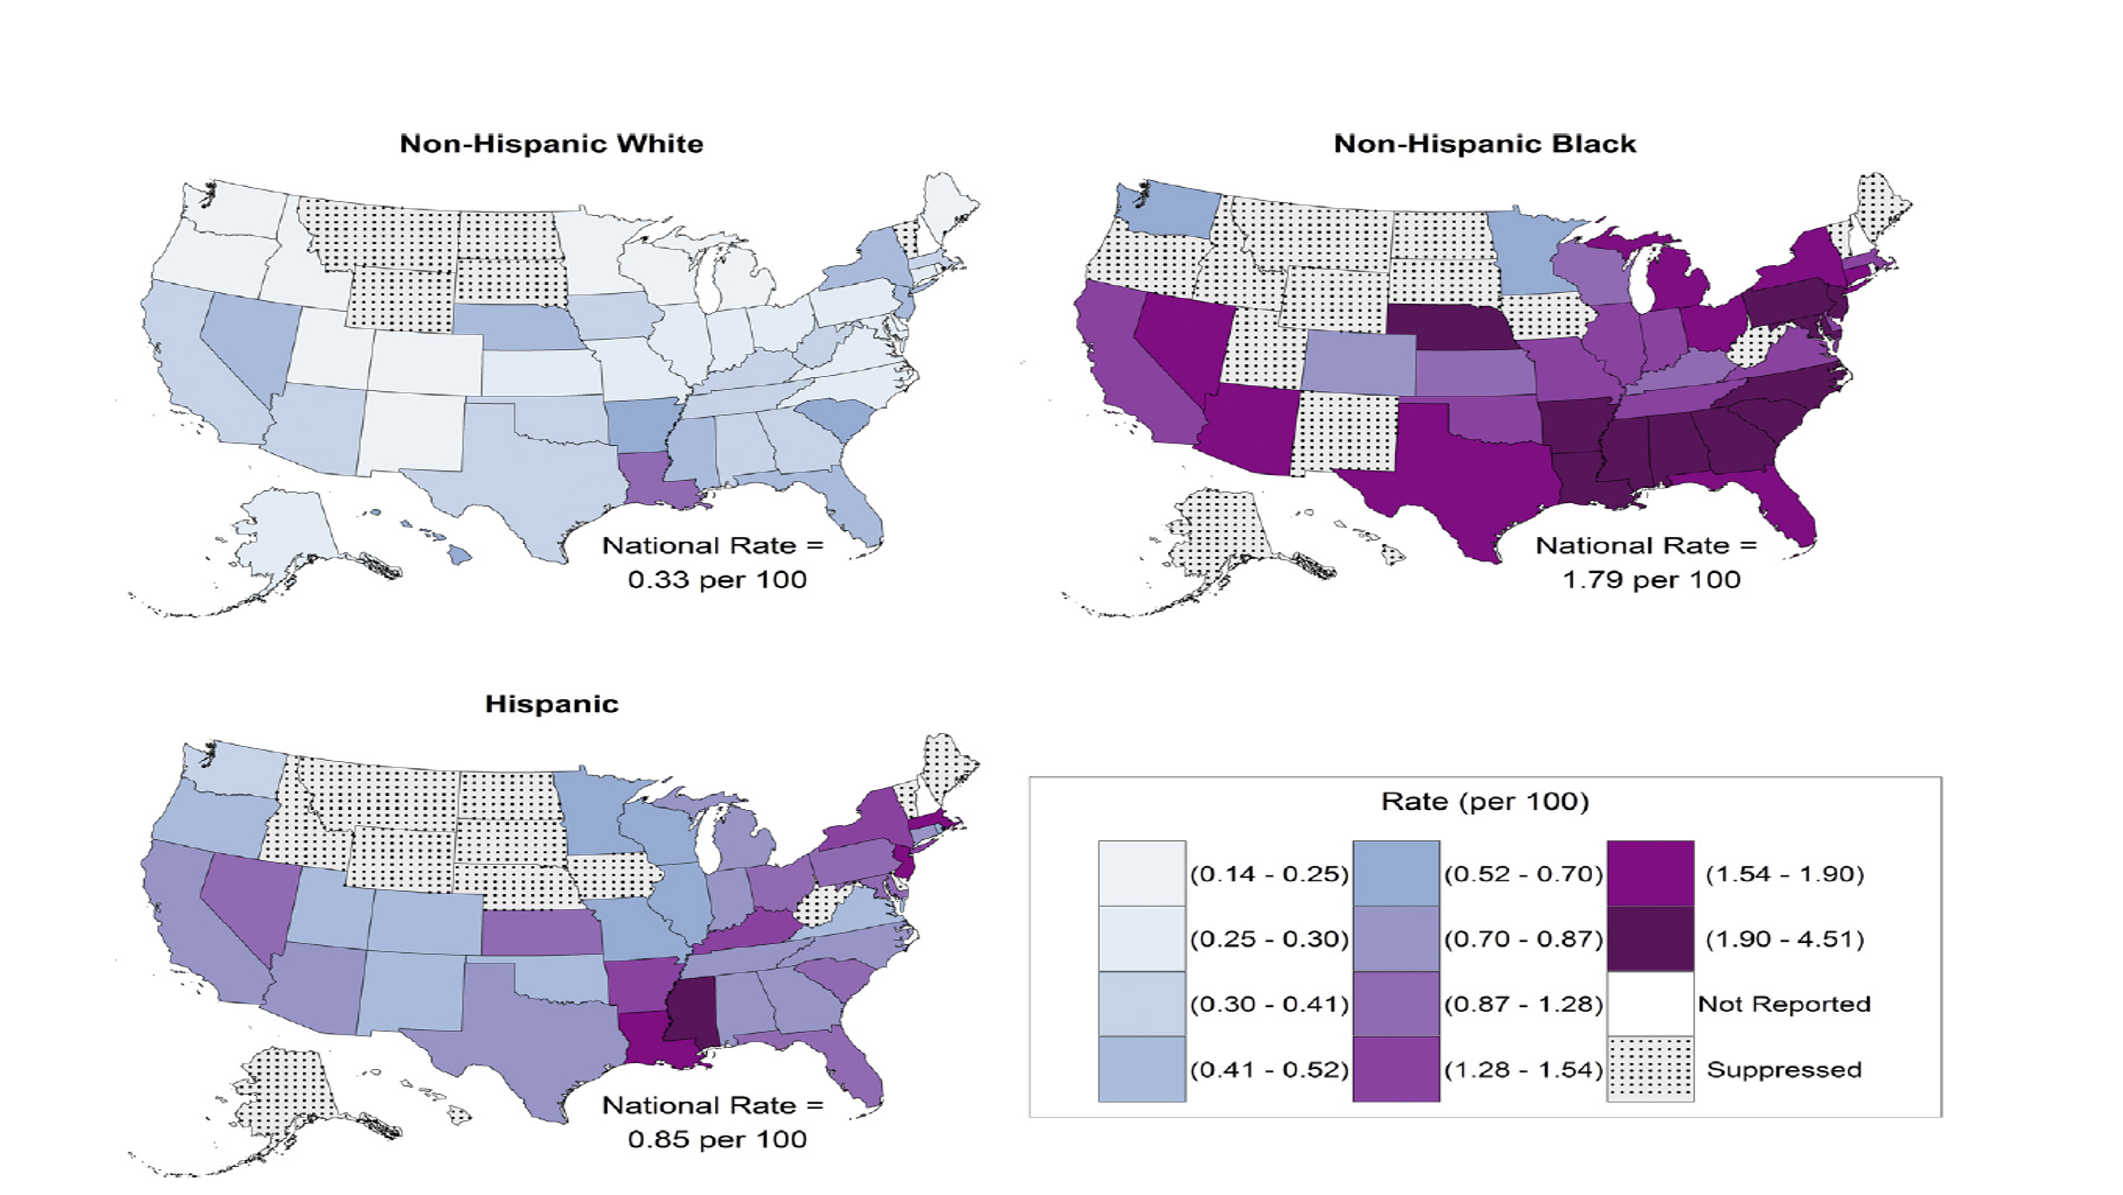 Rates of prevalent and new HIV diagnoses by race and ethnicity among men who have sex with men, U.S. states, 2013–2014